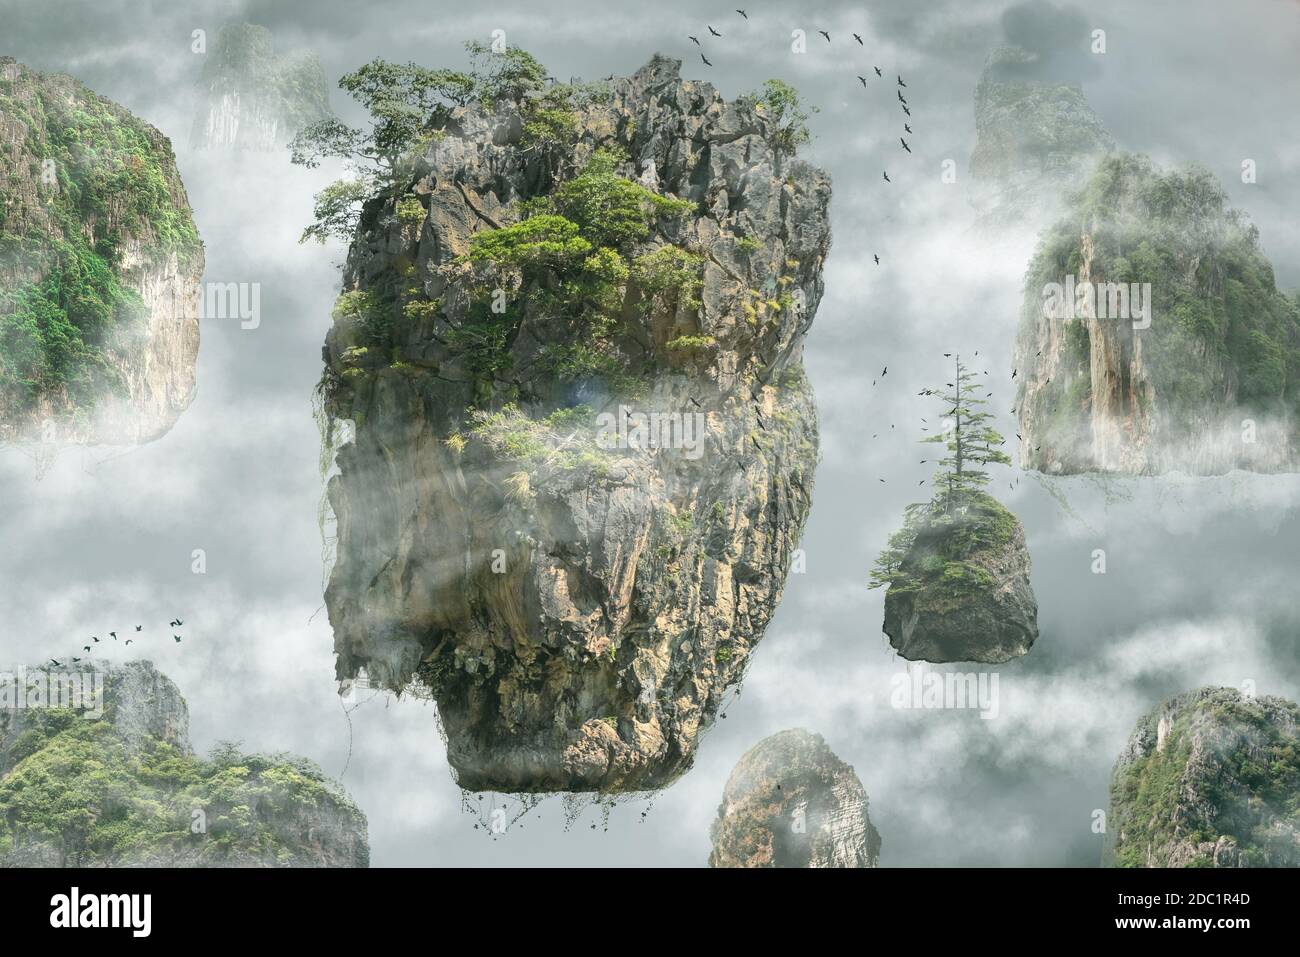 Fantasy world of floating islands in clouds with birds. Stock Photo